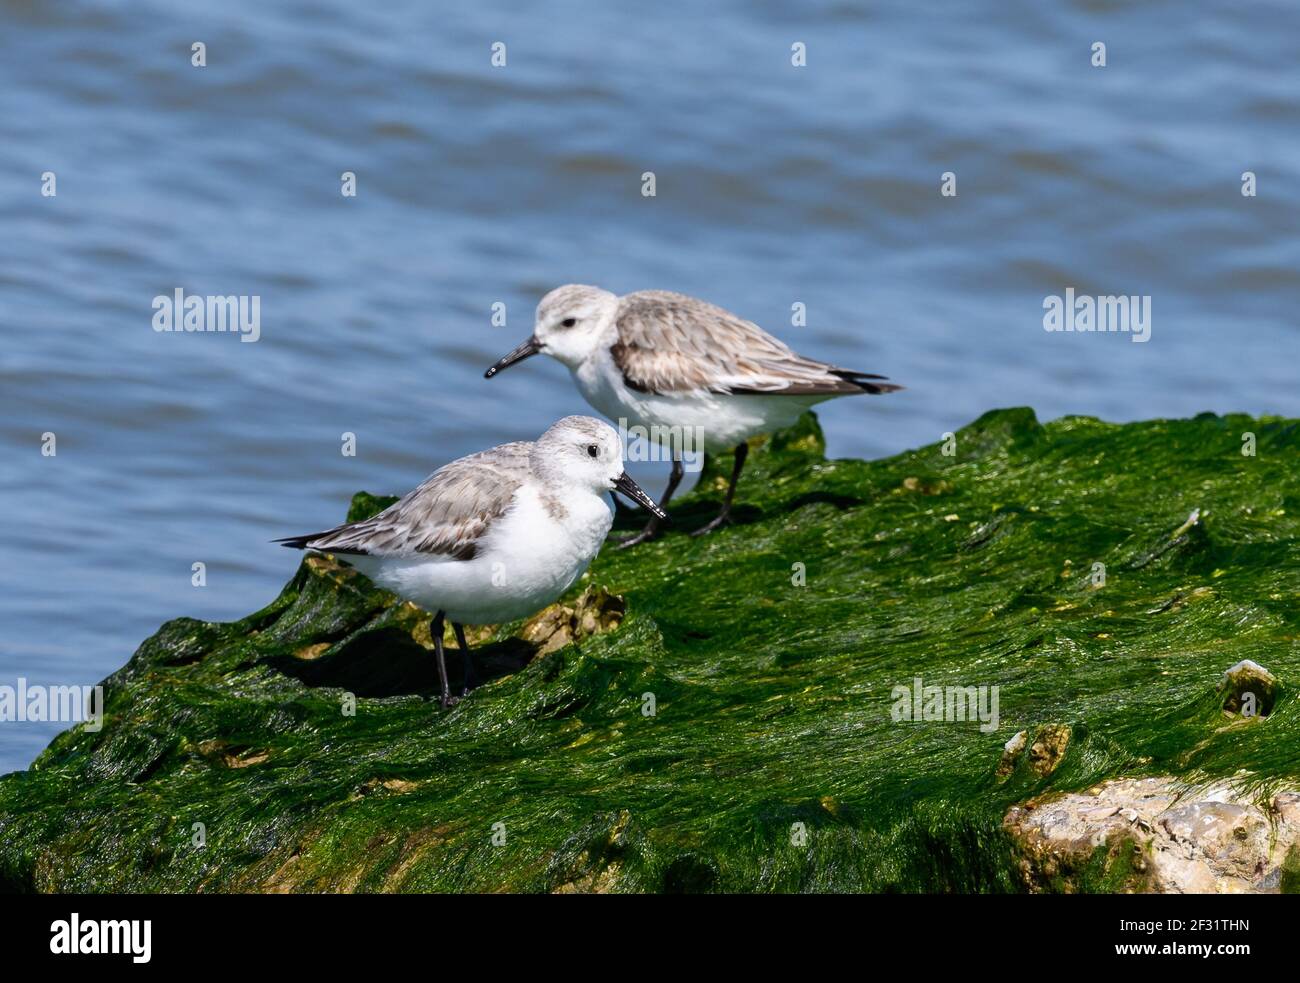 A pair of Sanderlings (Calidris alba) foraging on a rock covered in green algae. Houston, Texas, USA. Stock Photo